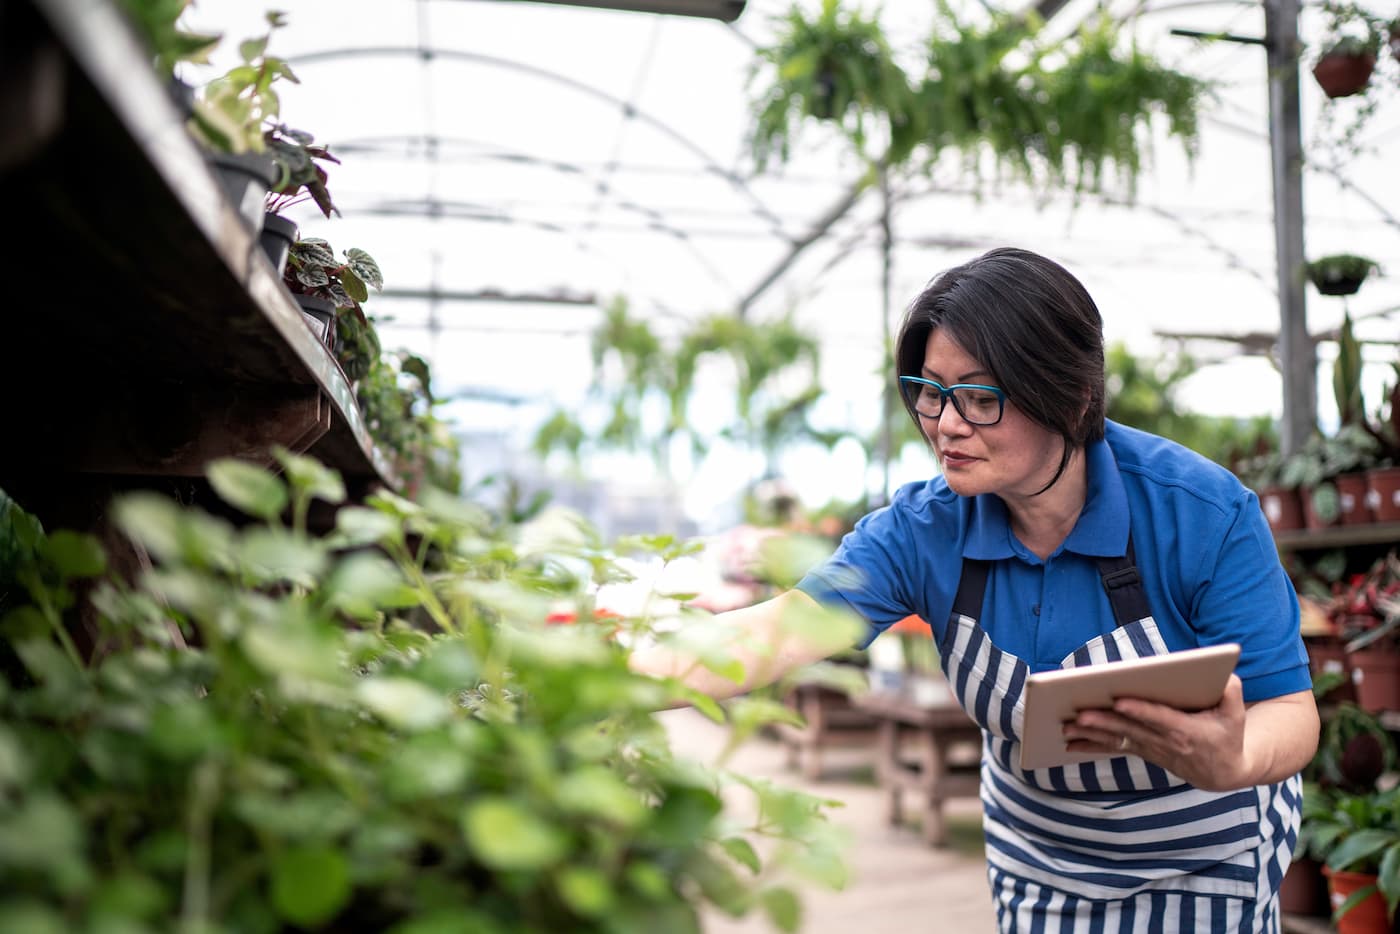 Woman checking plants in greenhouse